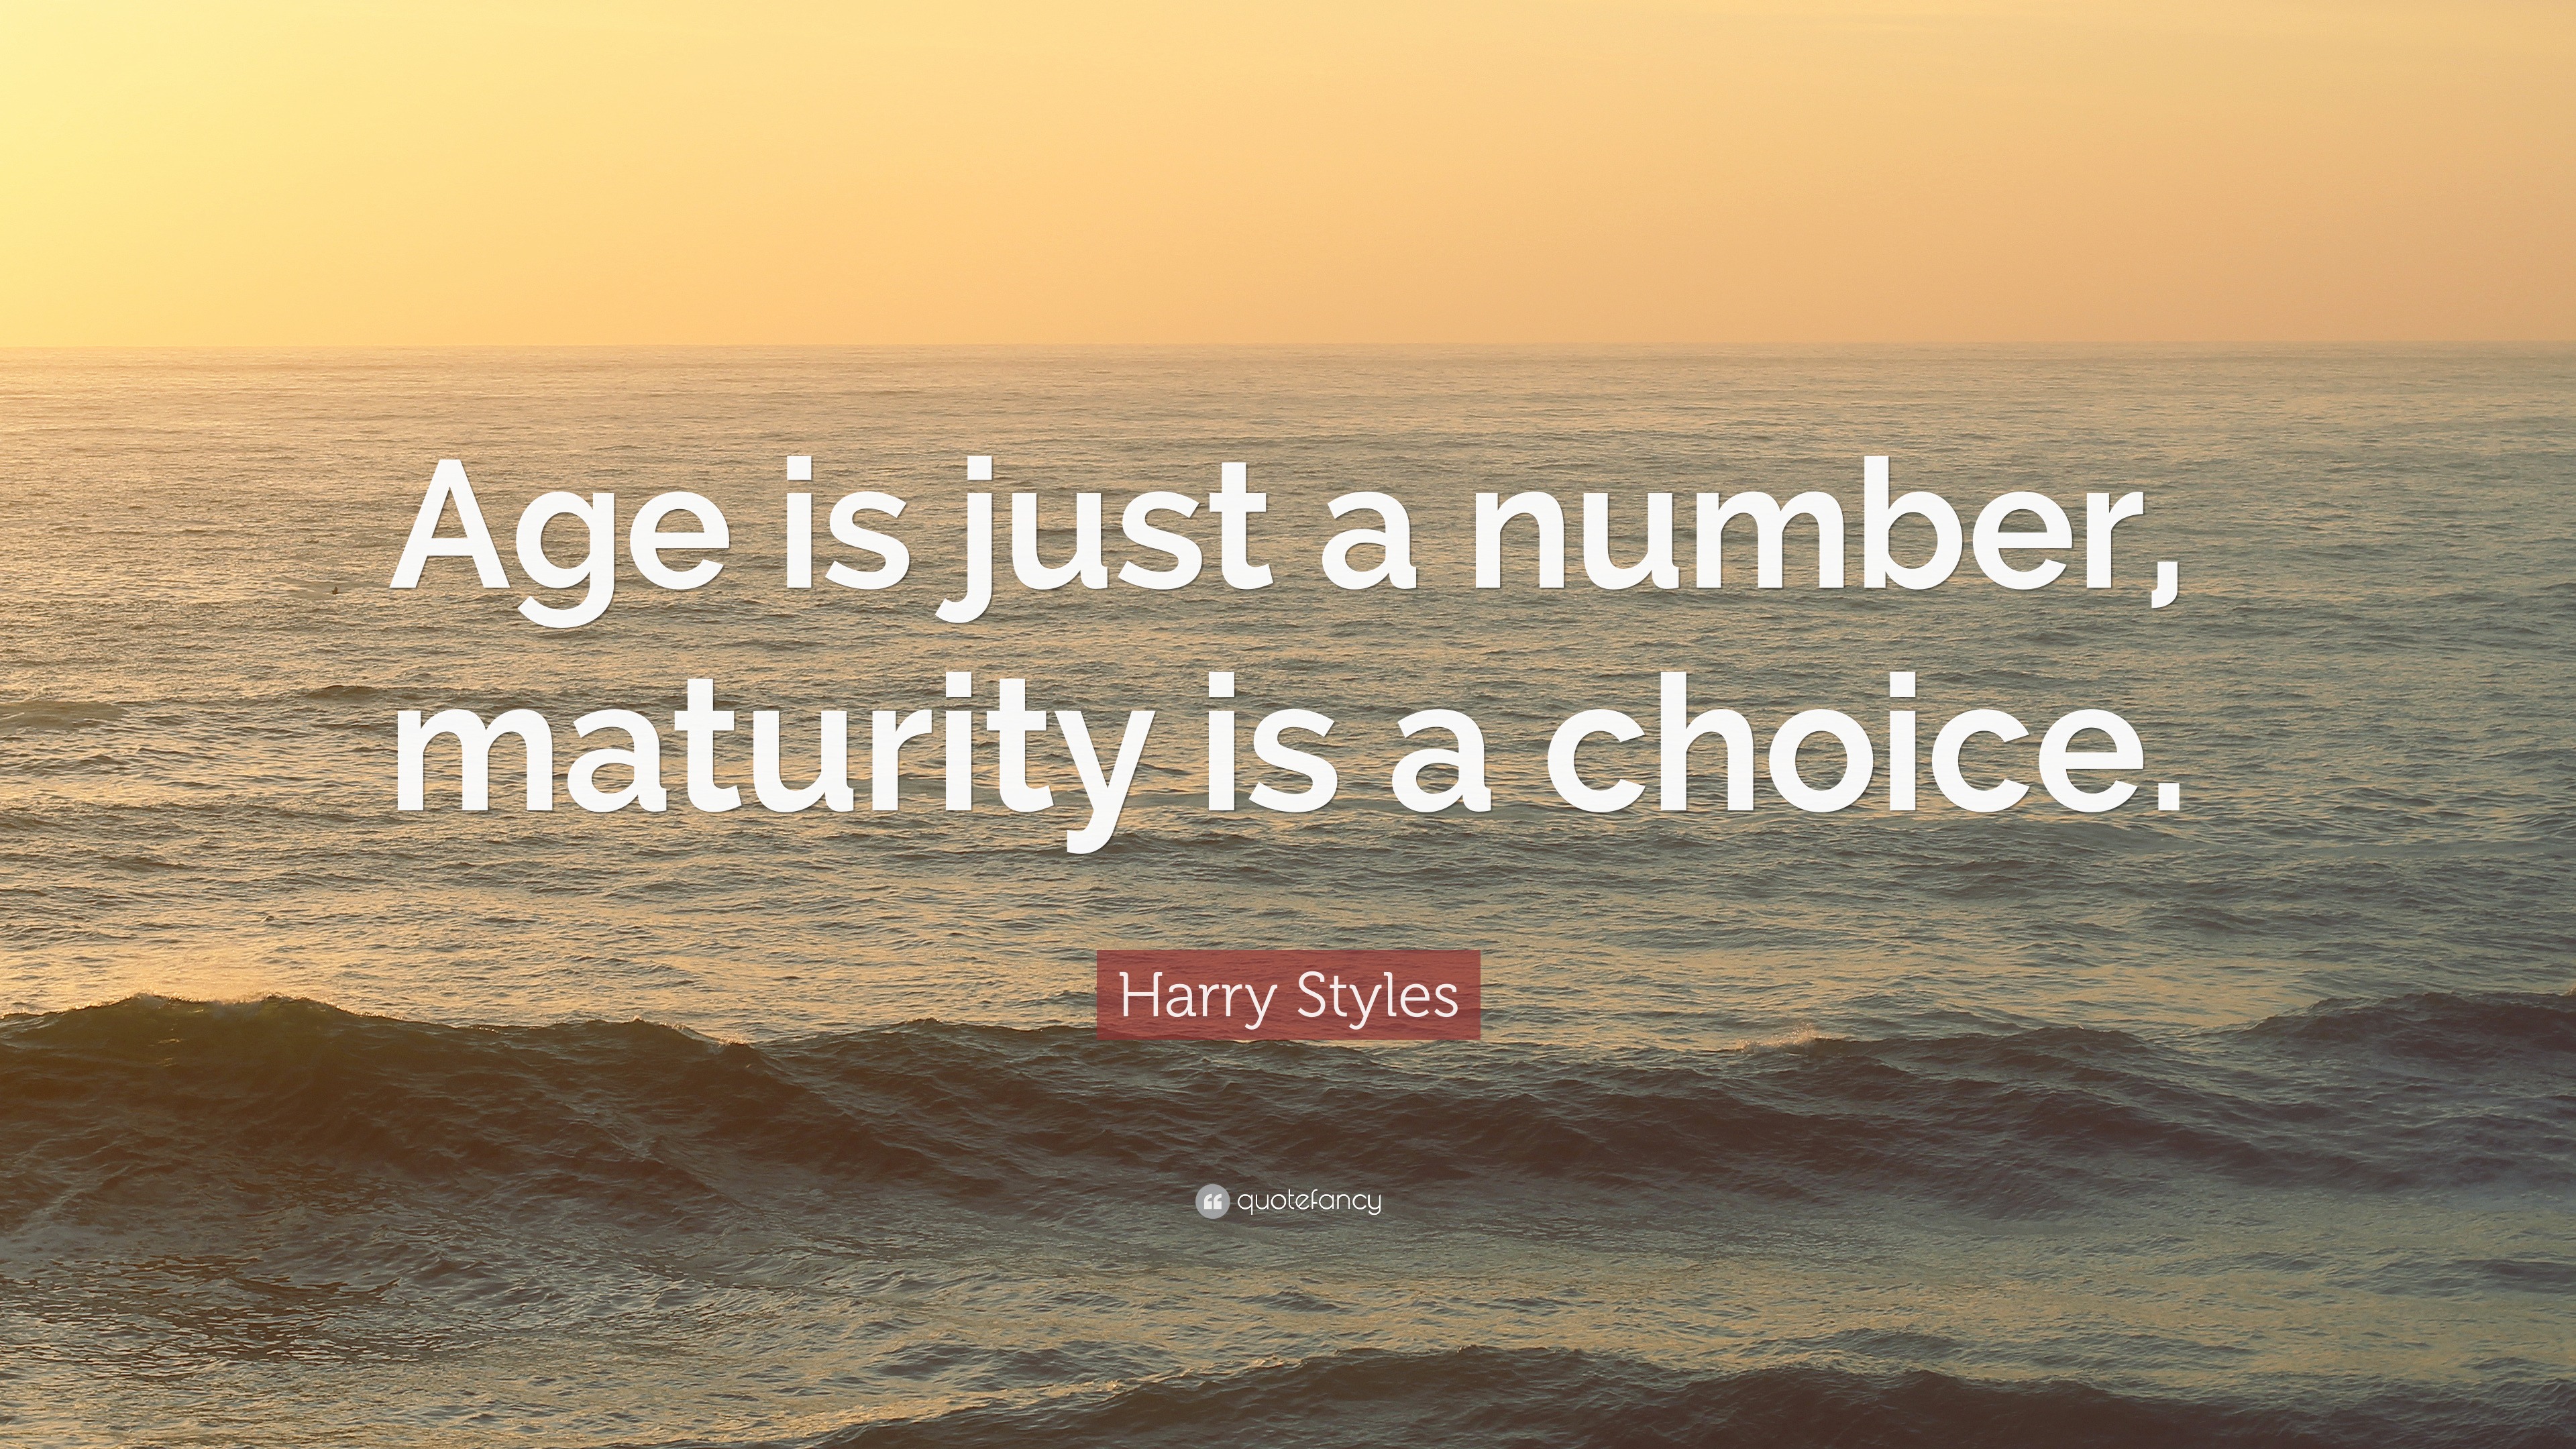 Harry Styles Quote “Age is just a number, maturity is a